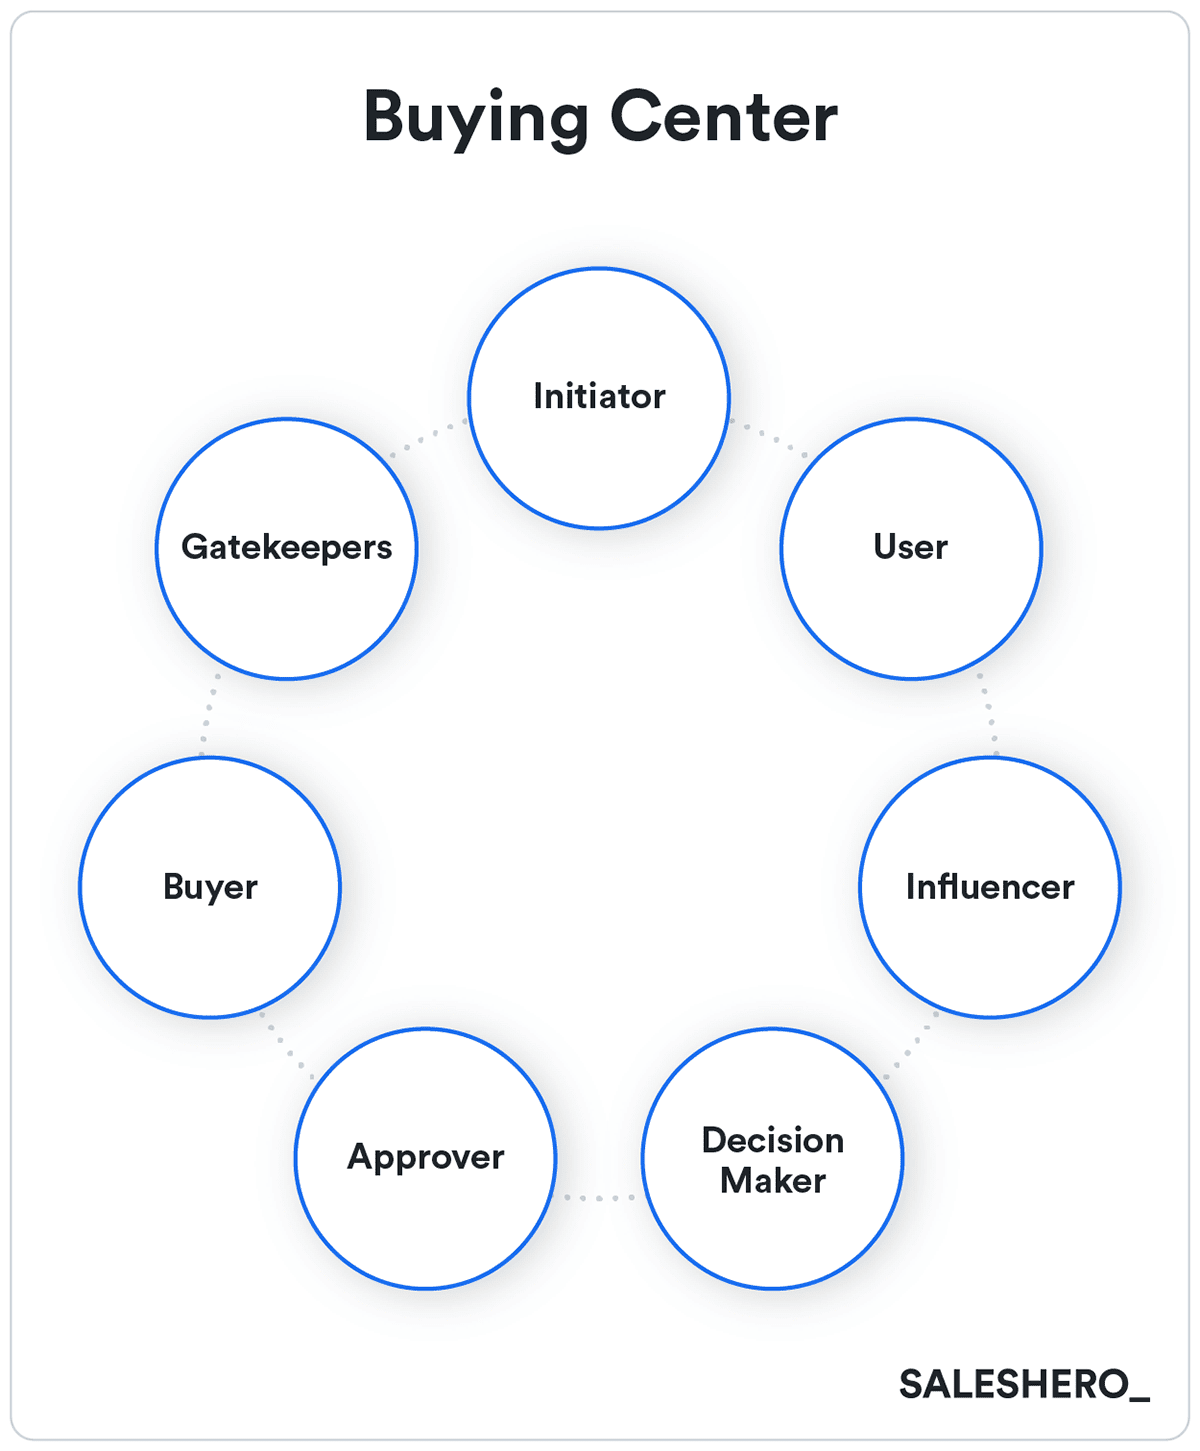 How to Build a Go-to-Market Strategy: identify the buying center and personas